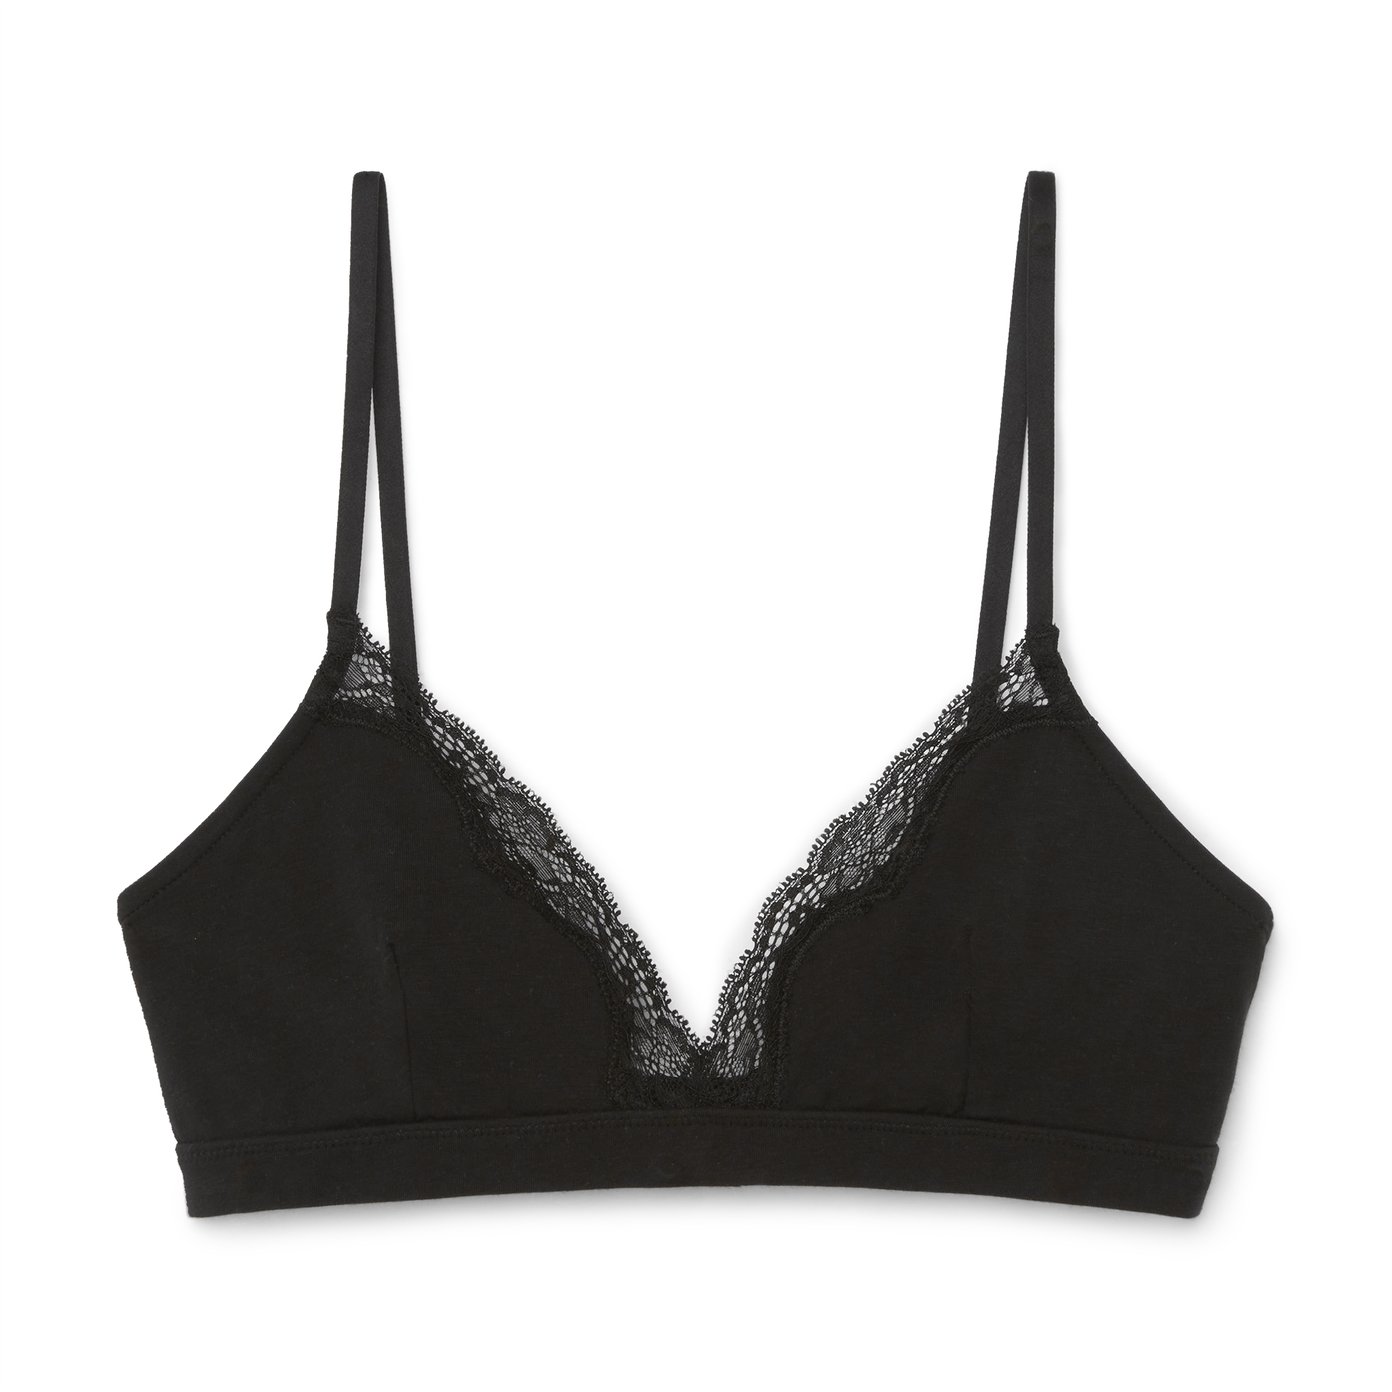 Lace Triangle Bralette – Skin. Addressing the body.